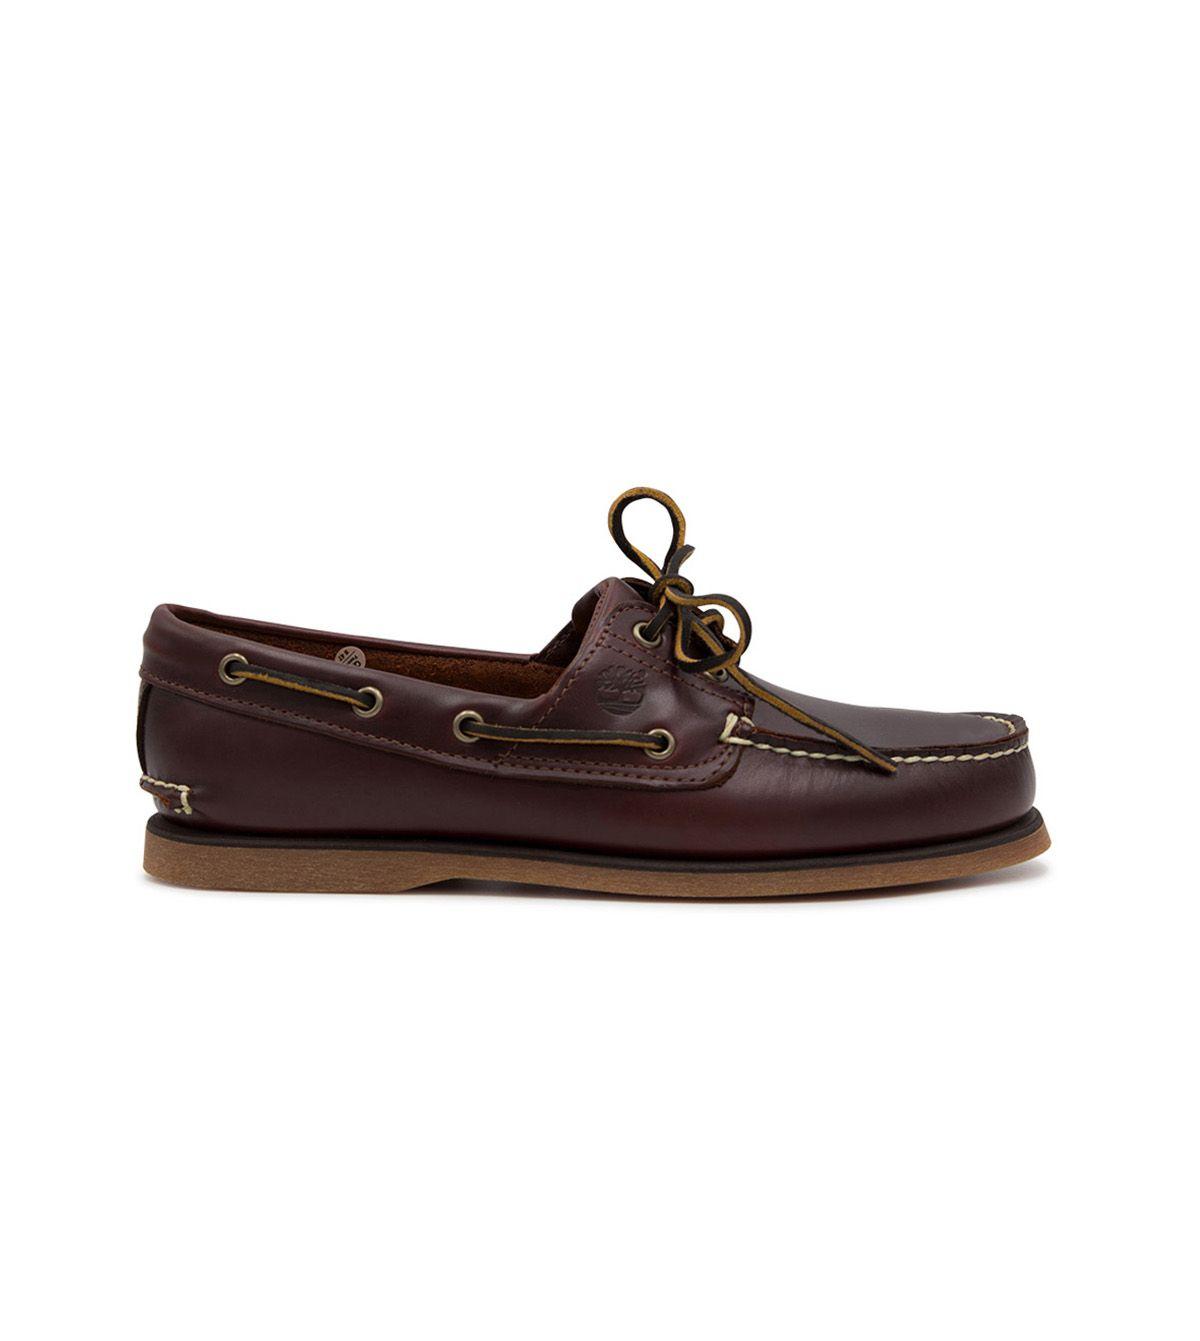 Timberland Brown Leather Loafers in Brown for Men - Lyst